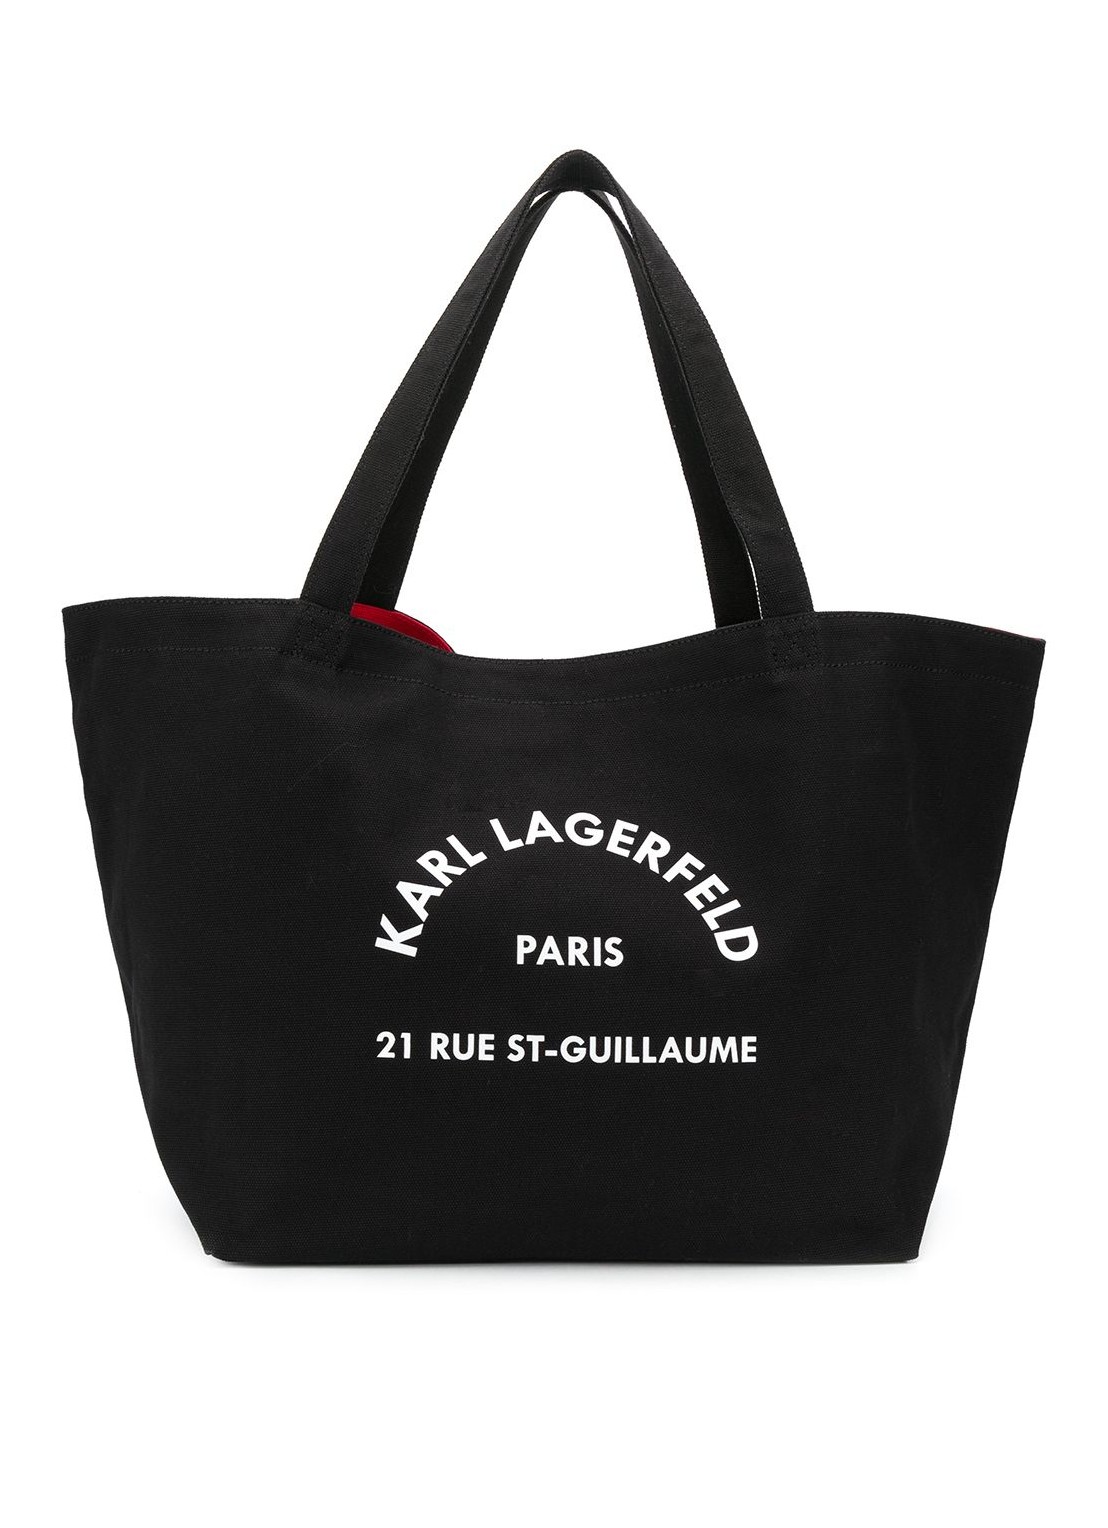 Viaje karl lagerfeld luggage woman k/rue st guillaume canvas tote 201w3138 a999 talla negro
 